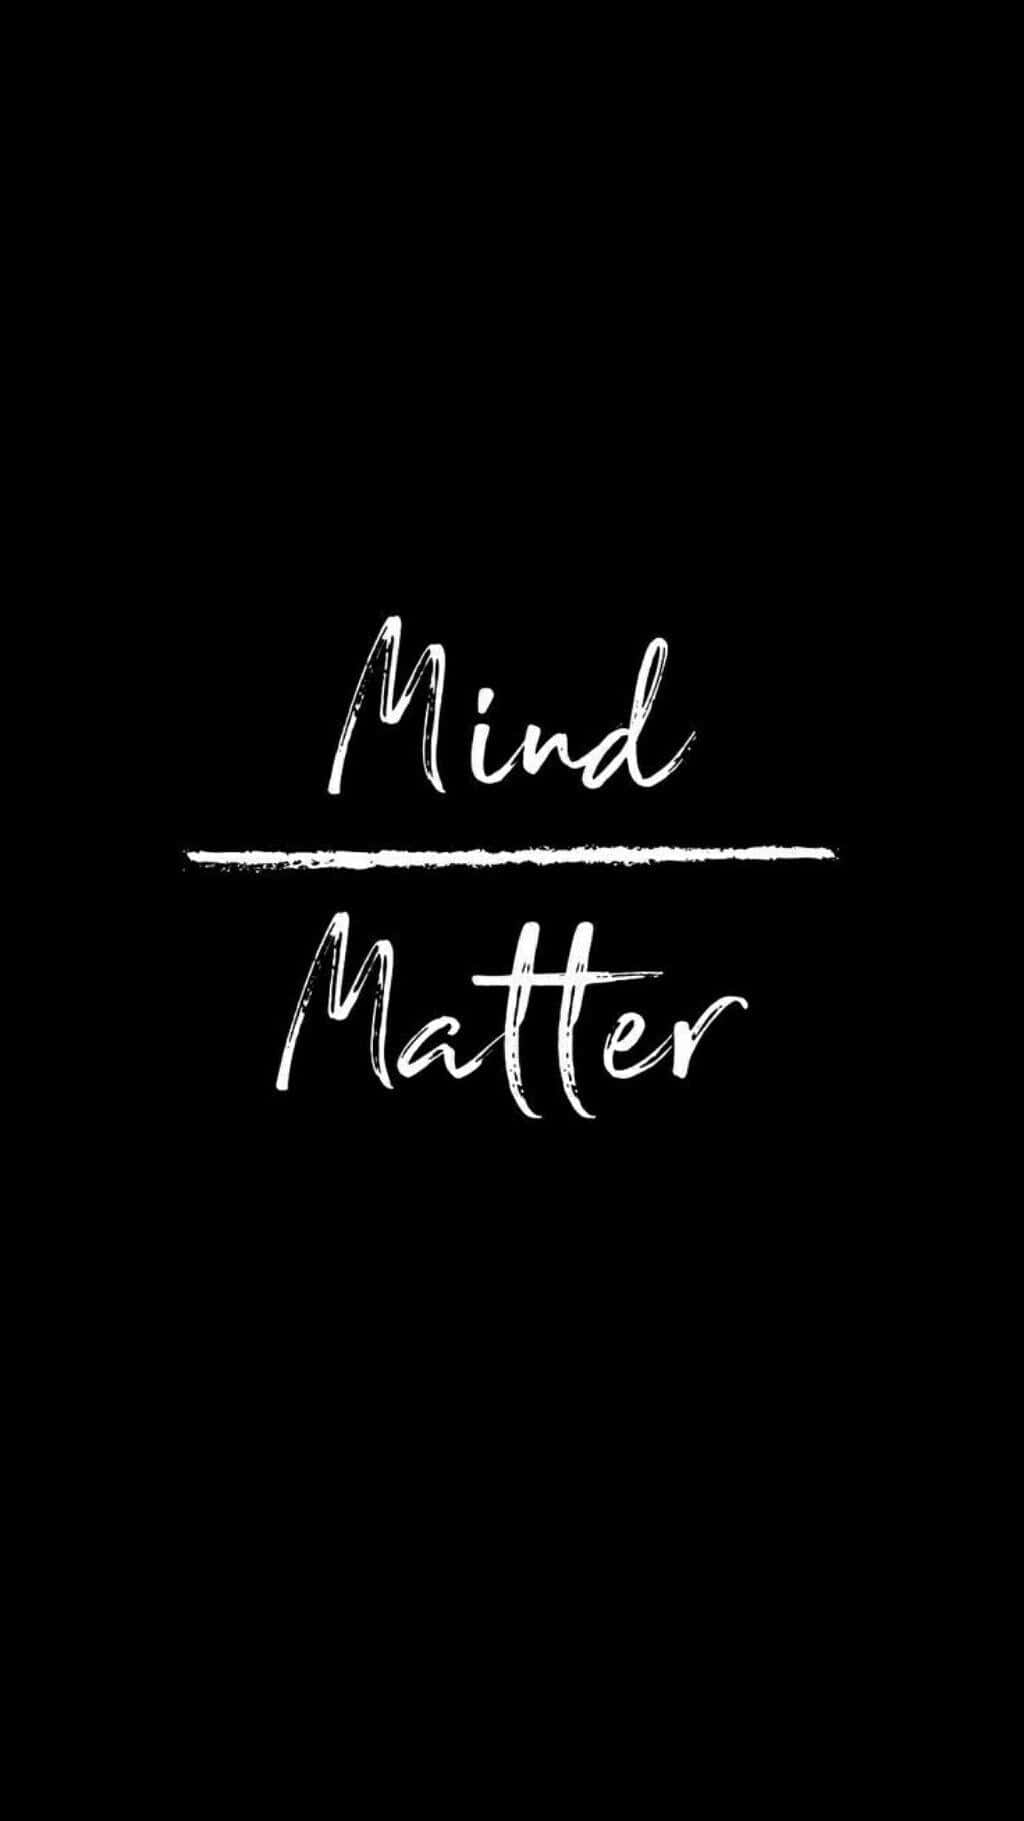 It's Time to Re-evaluate Your Mindset Wallpaper